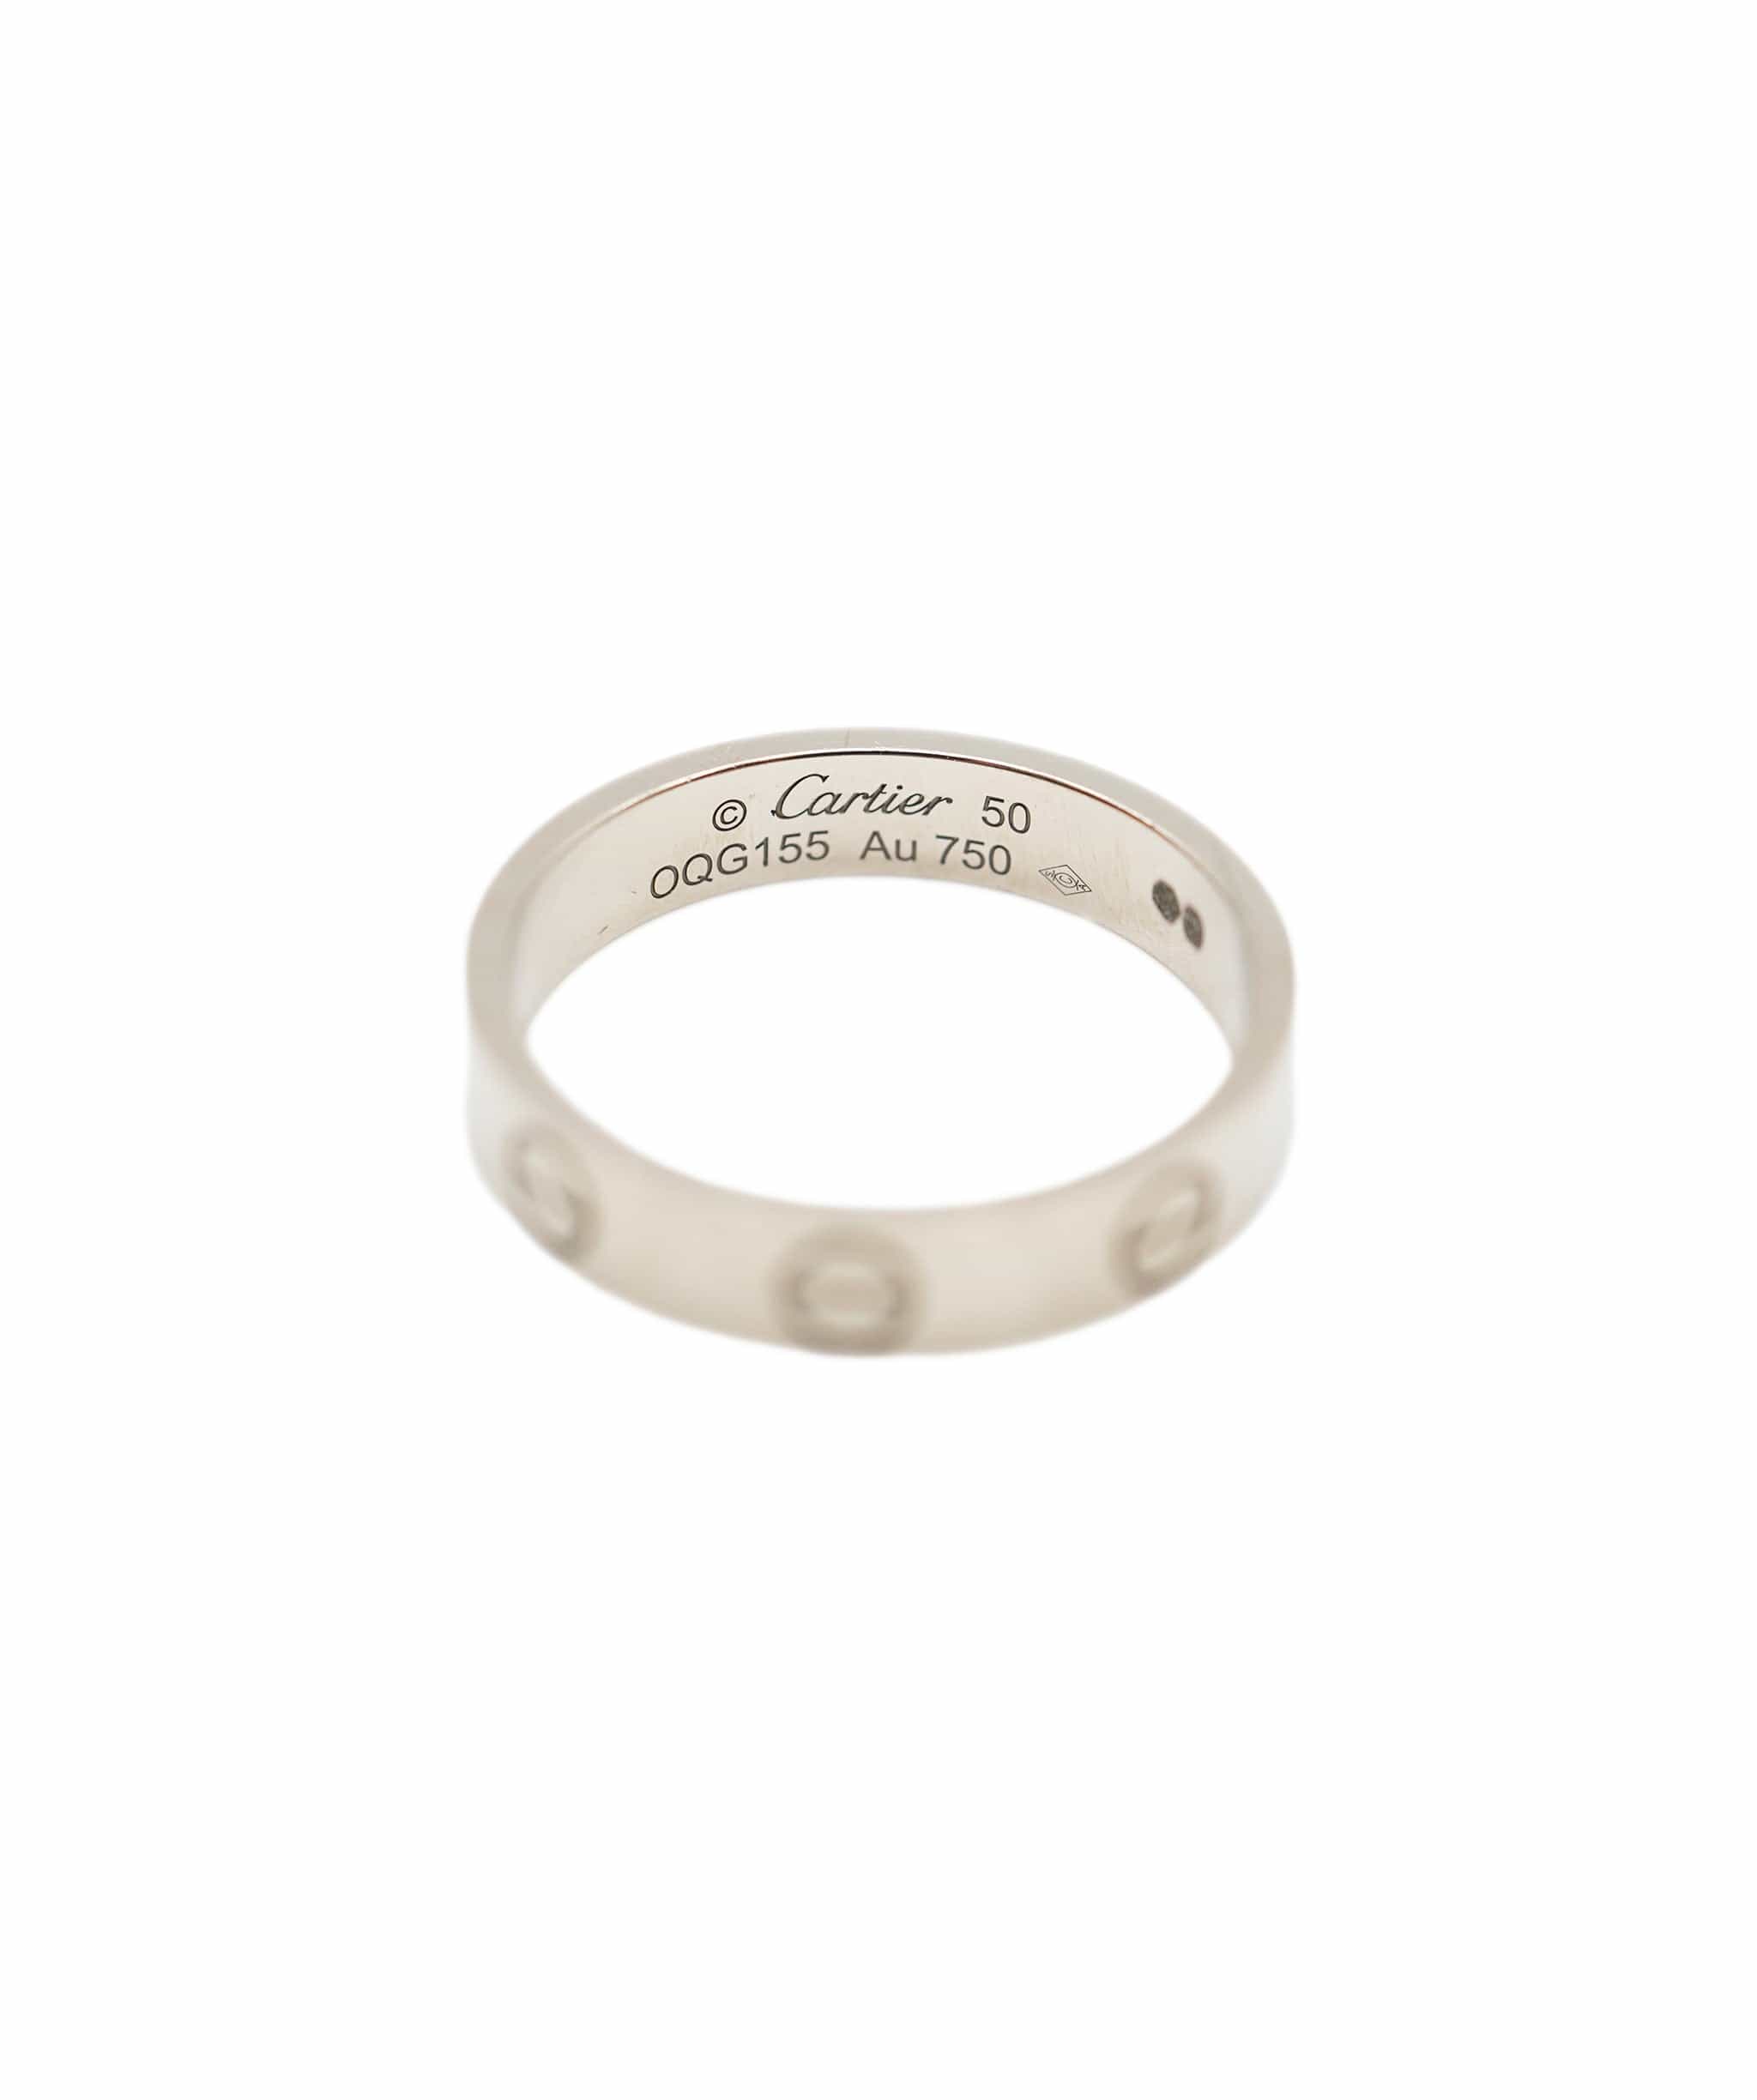 Cartier Cartier thin Love ring White Gold, Size 50, Full Set AHC1478